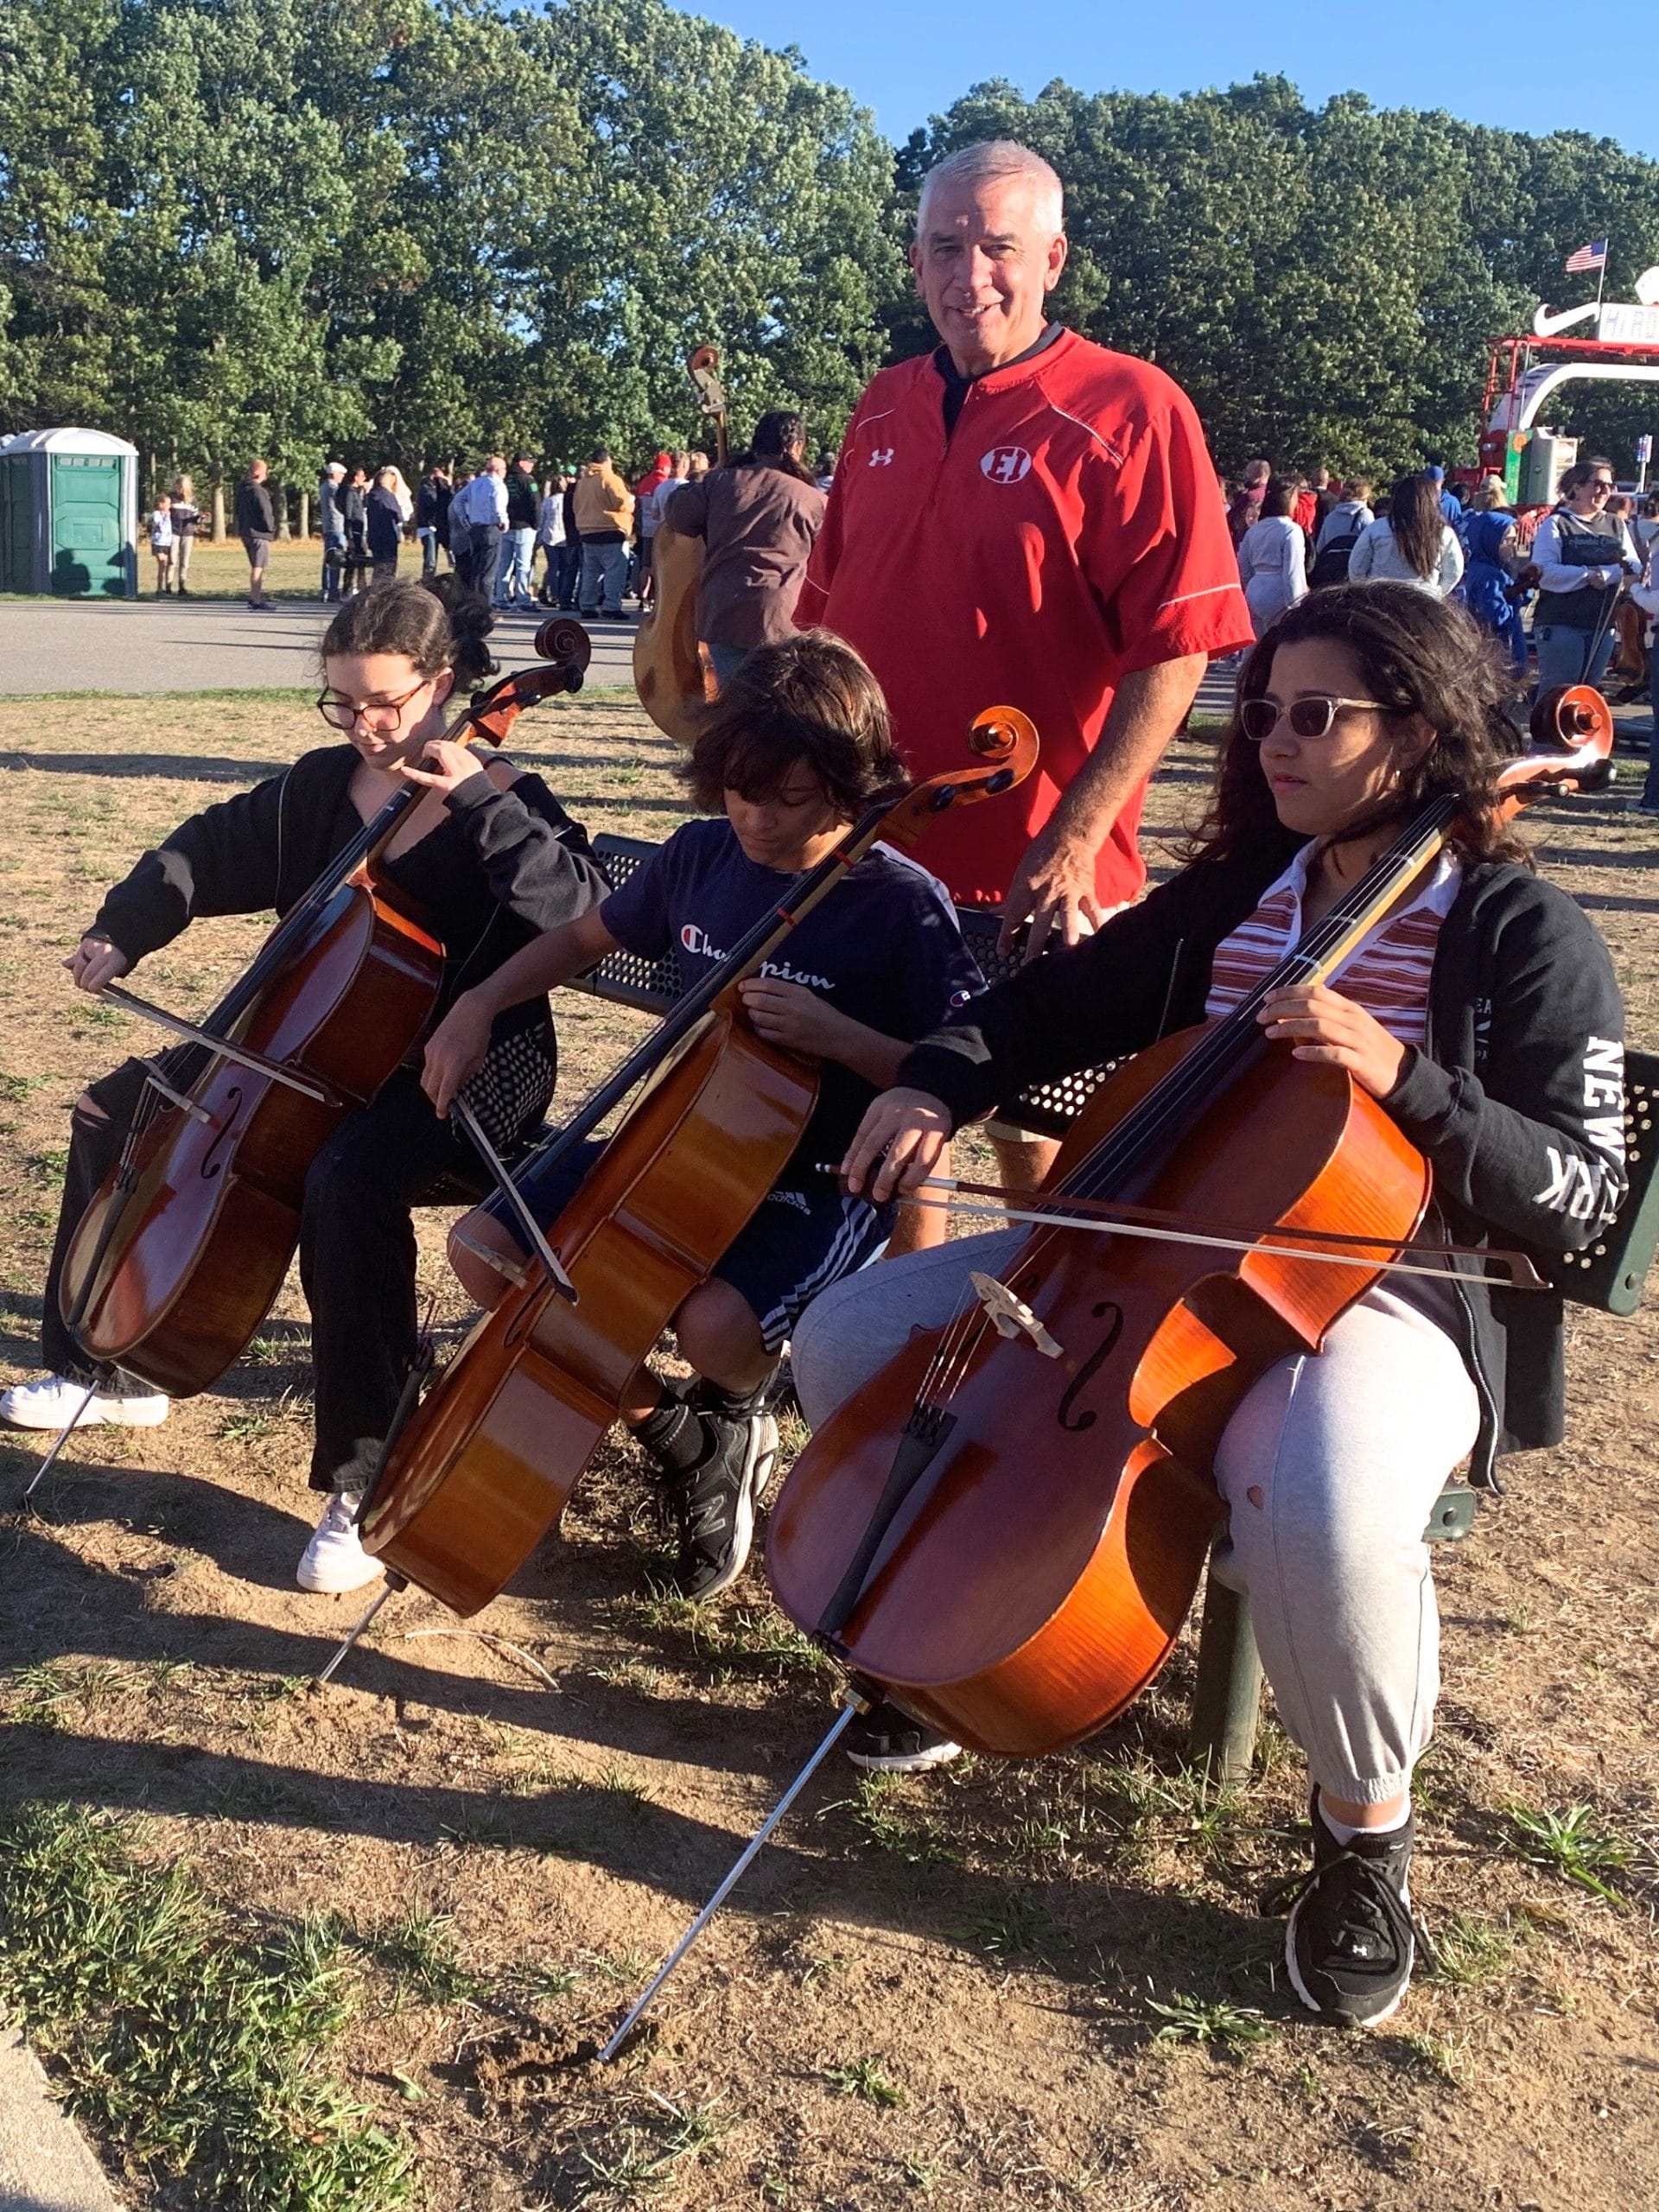 East Islip’s Young Musicians Perform At FTK Carnival Opening Ceremony